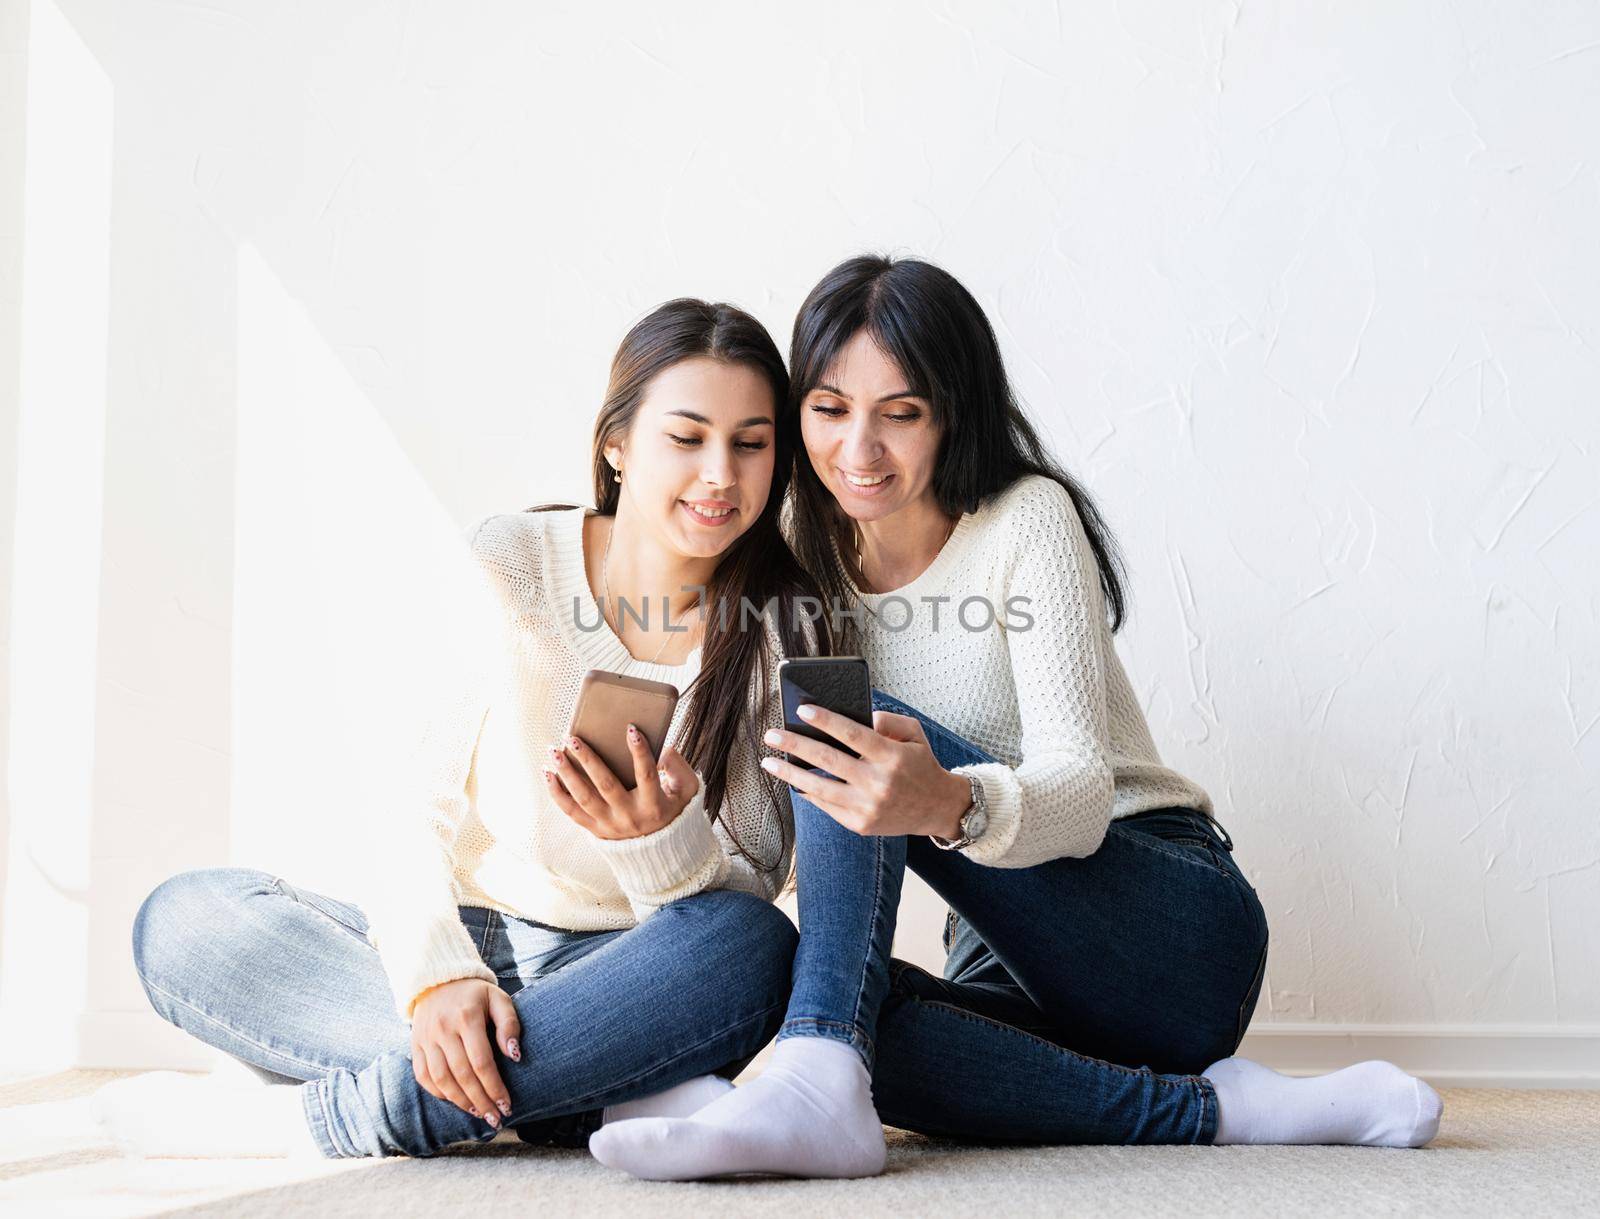 Two beautiful laughing women in jeans and white sweaters texting to friends using mobile phone